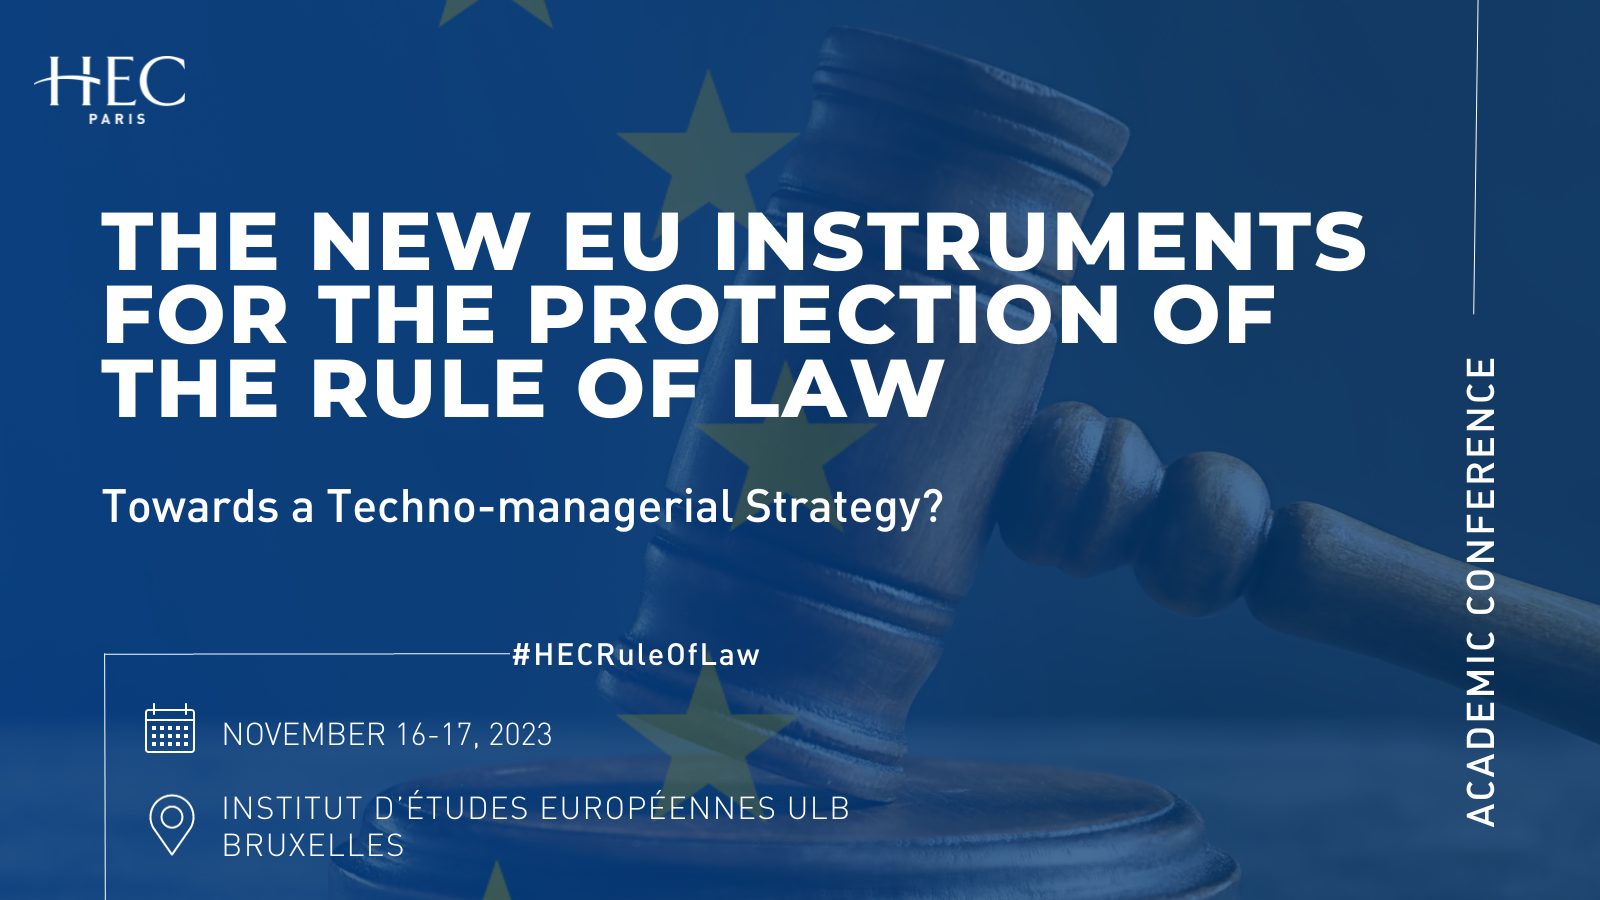 Academic conference HEC Paris - The New EU instruments for the Protection of the Rule of Law - November 2023